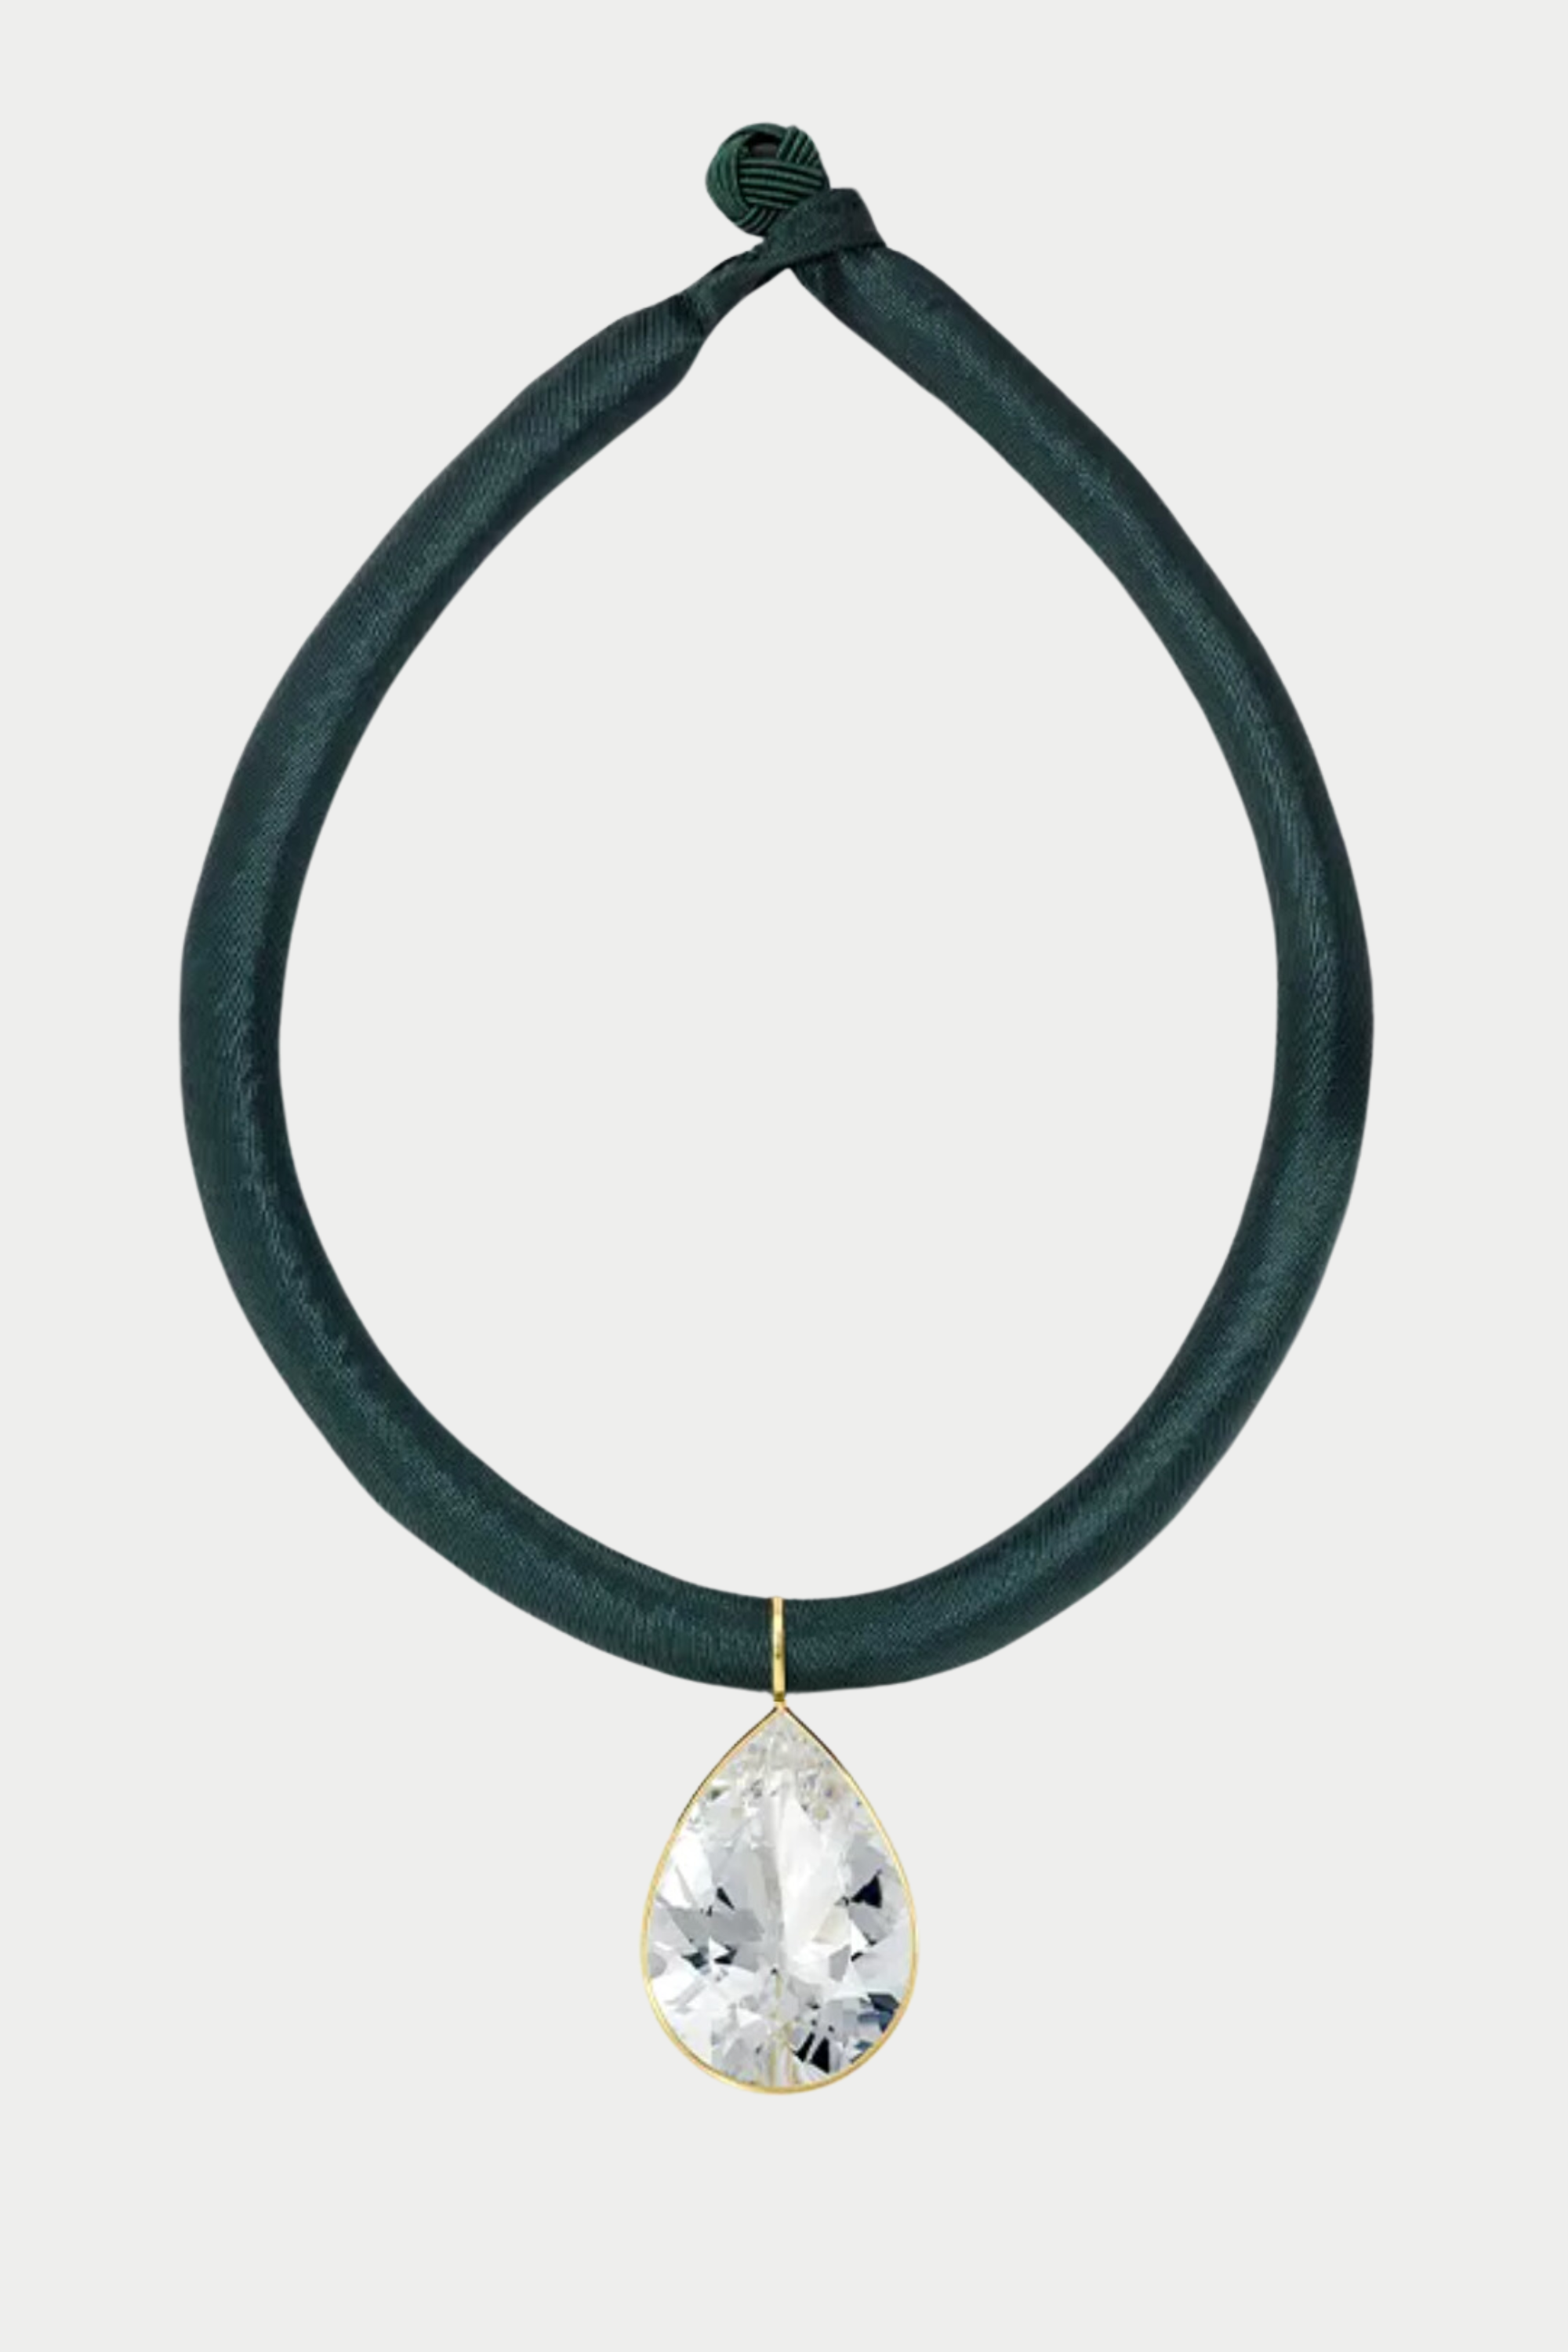 SAUER - Yvonne Rock Crystal Necklace, Green